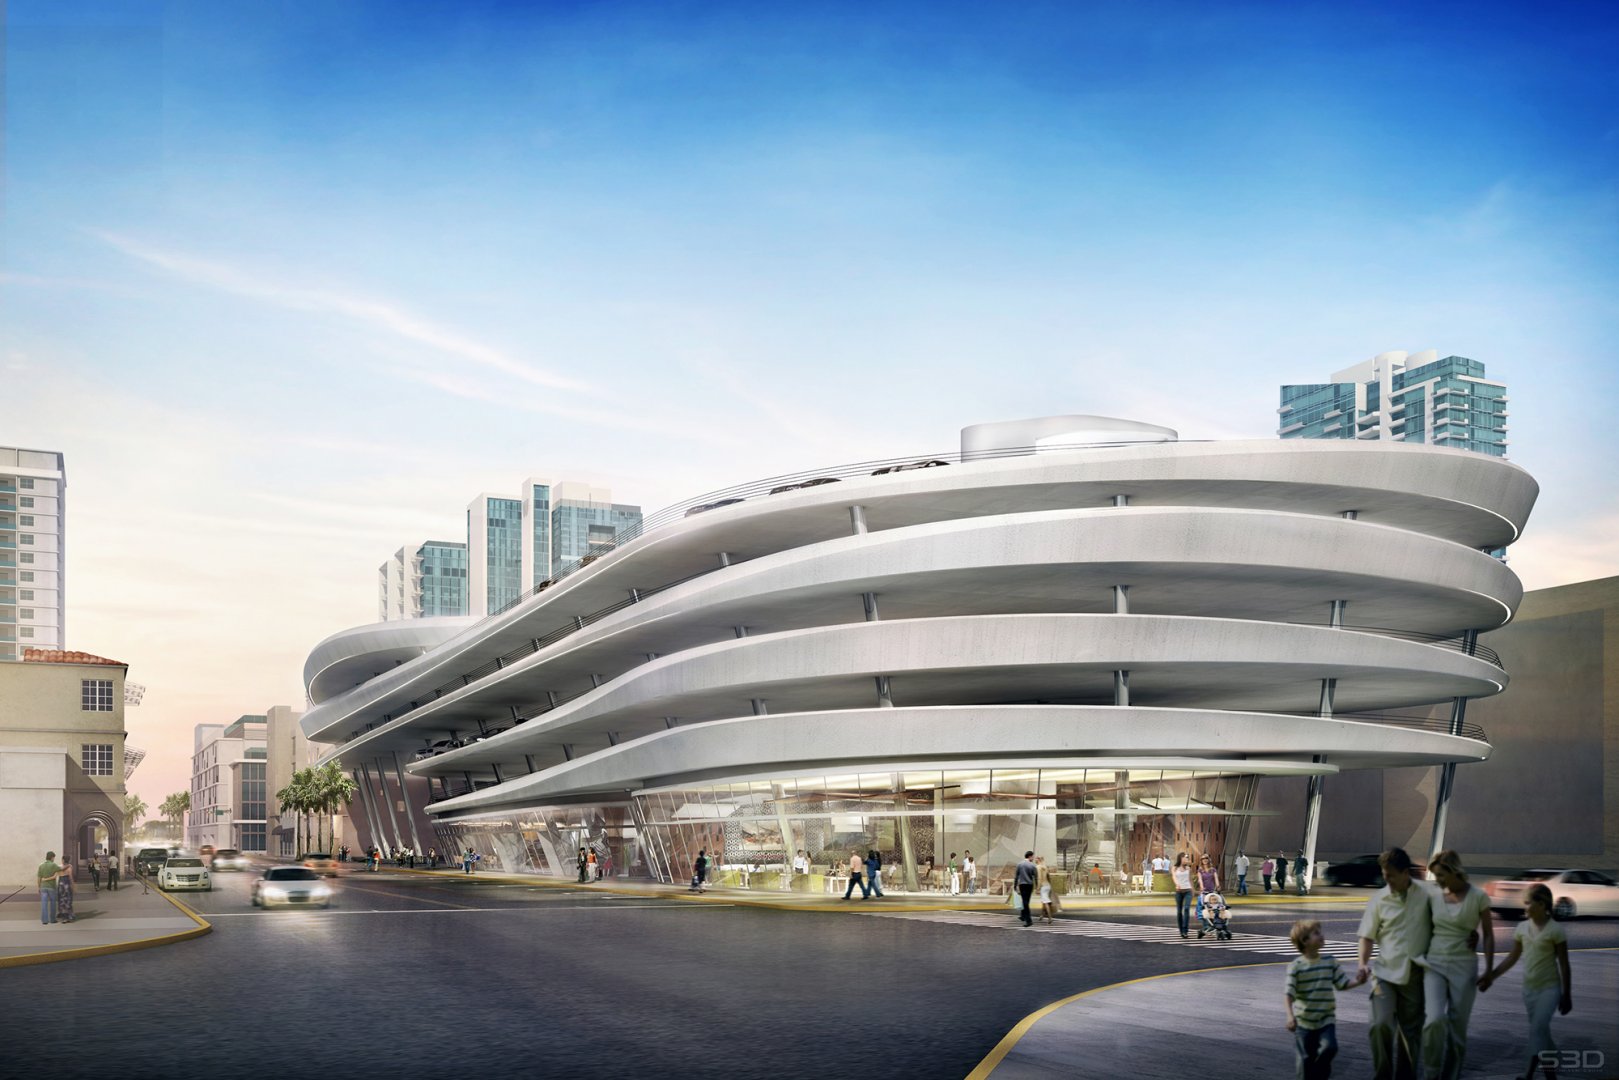 Rejected design by Zaha Hadid/BBA for the Collins Park garage